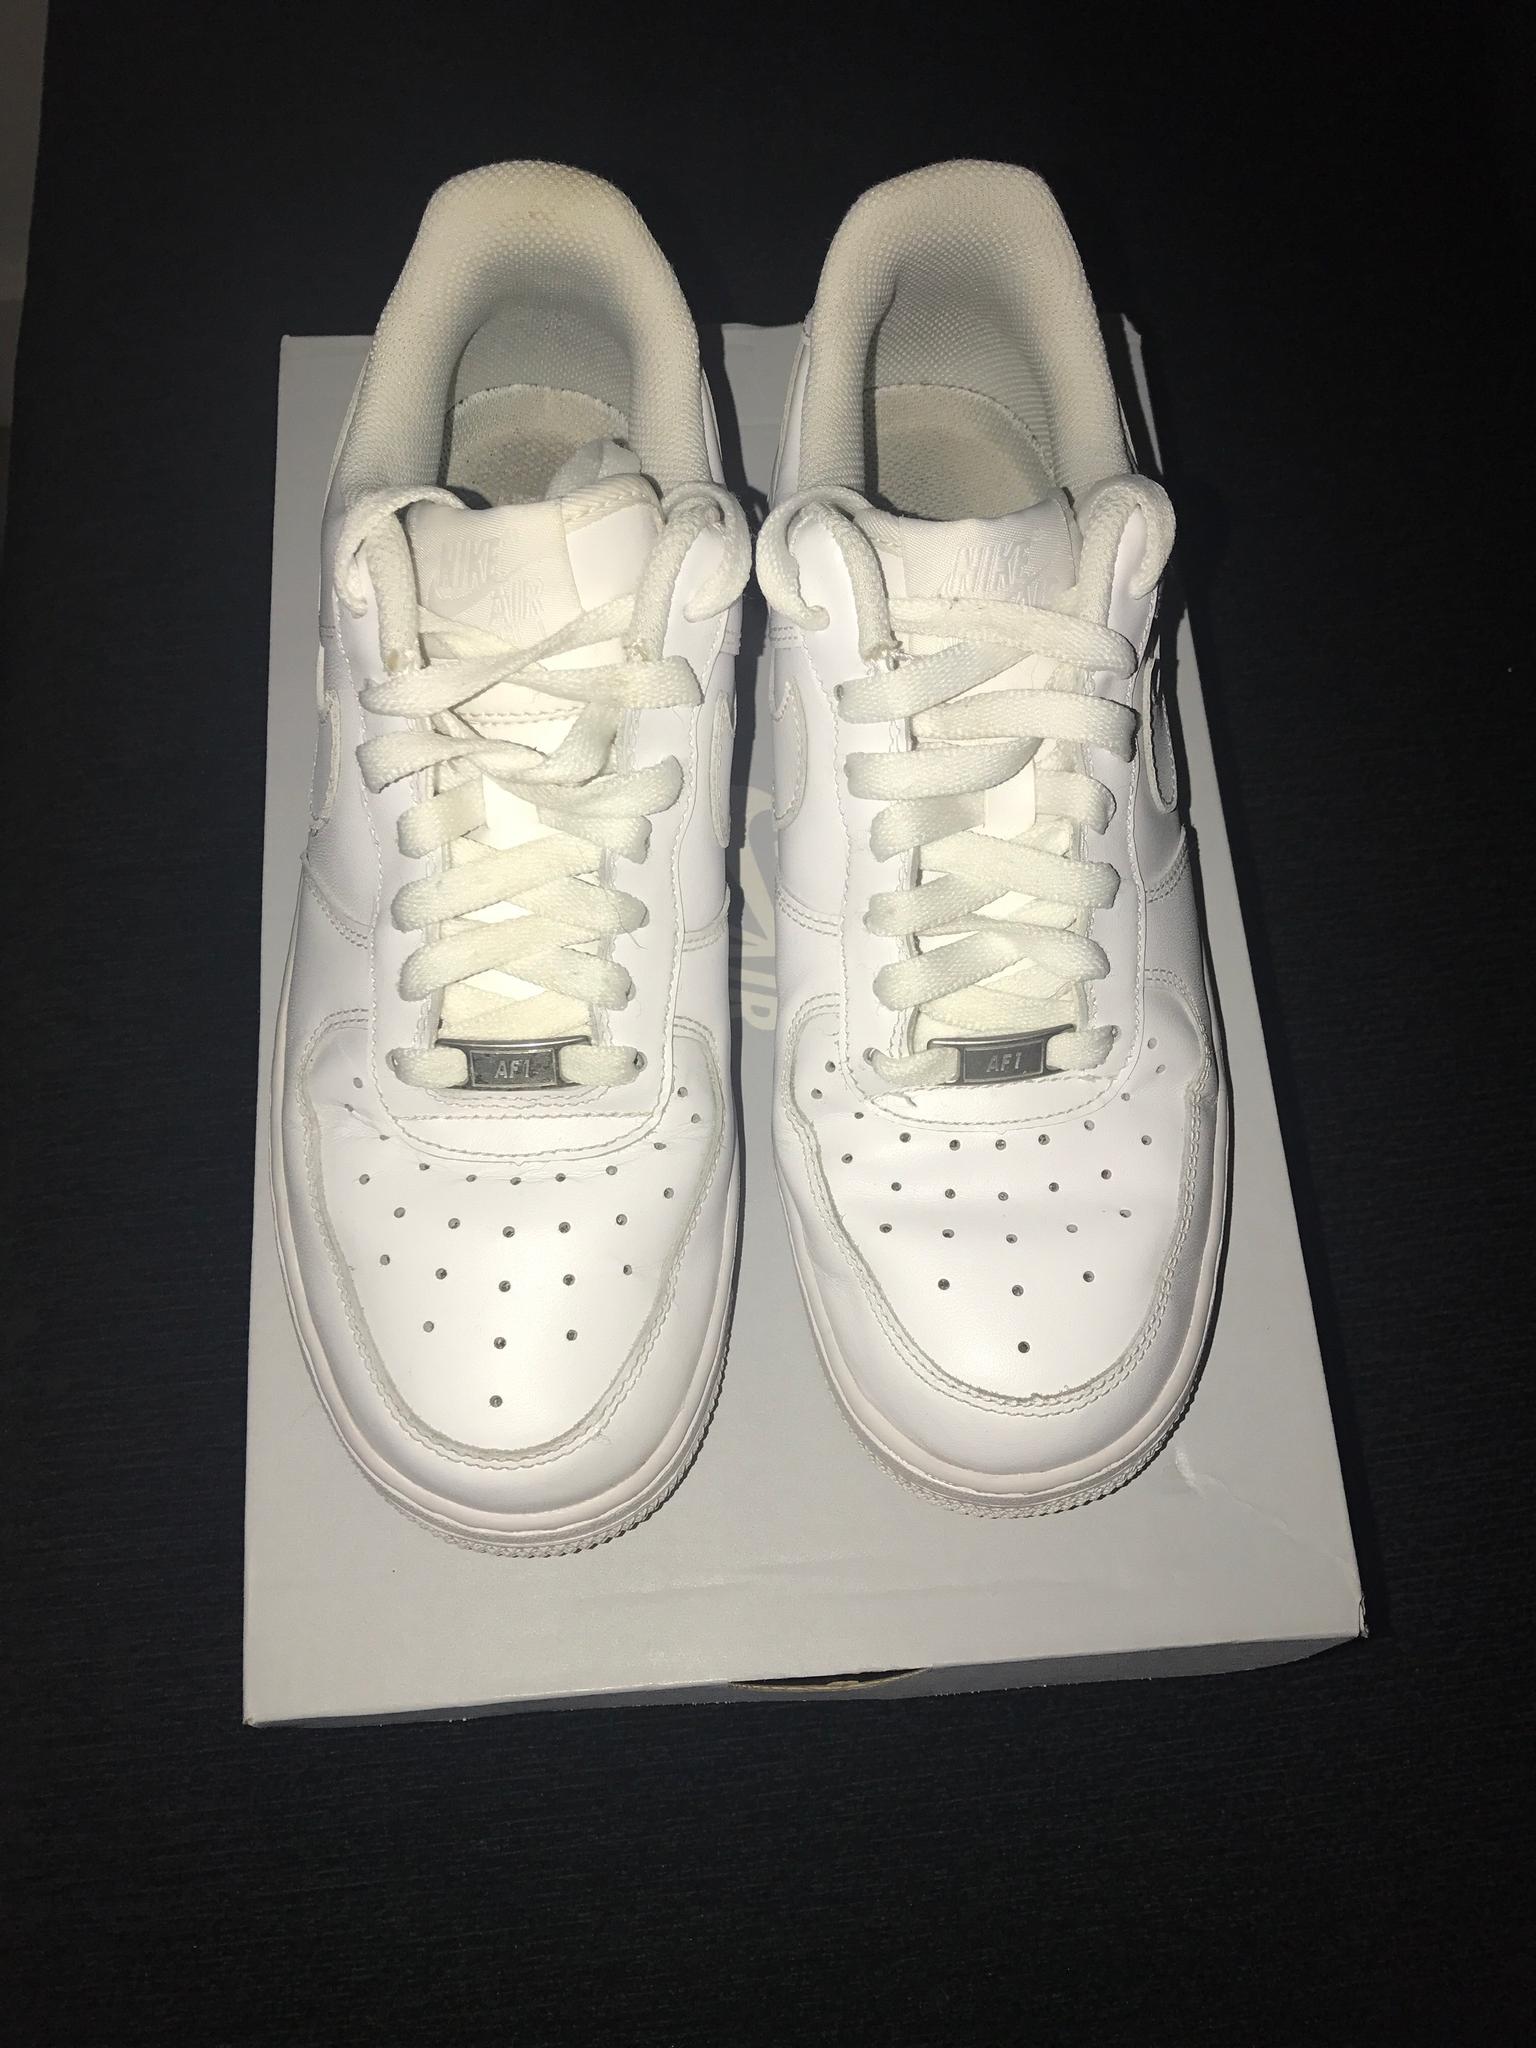 white air force 1 size 9.5